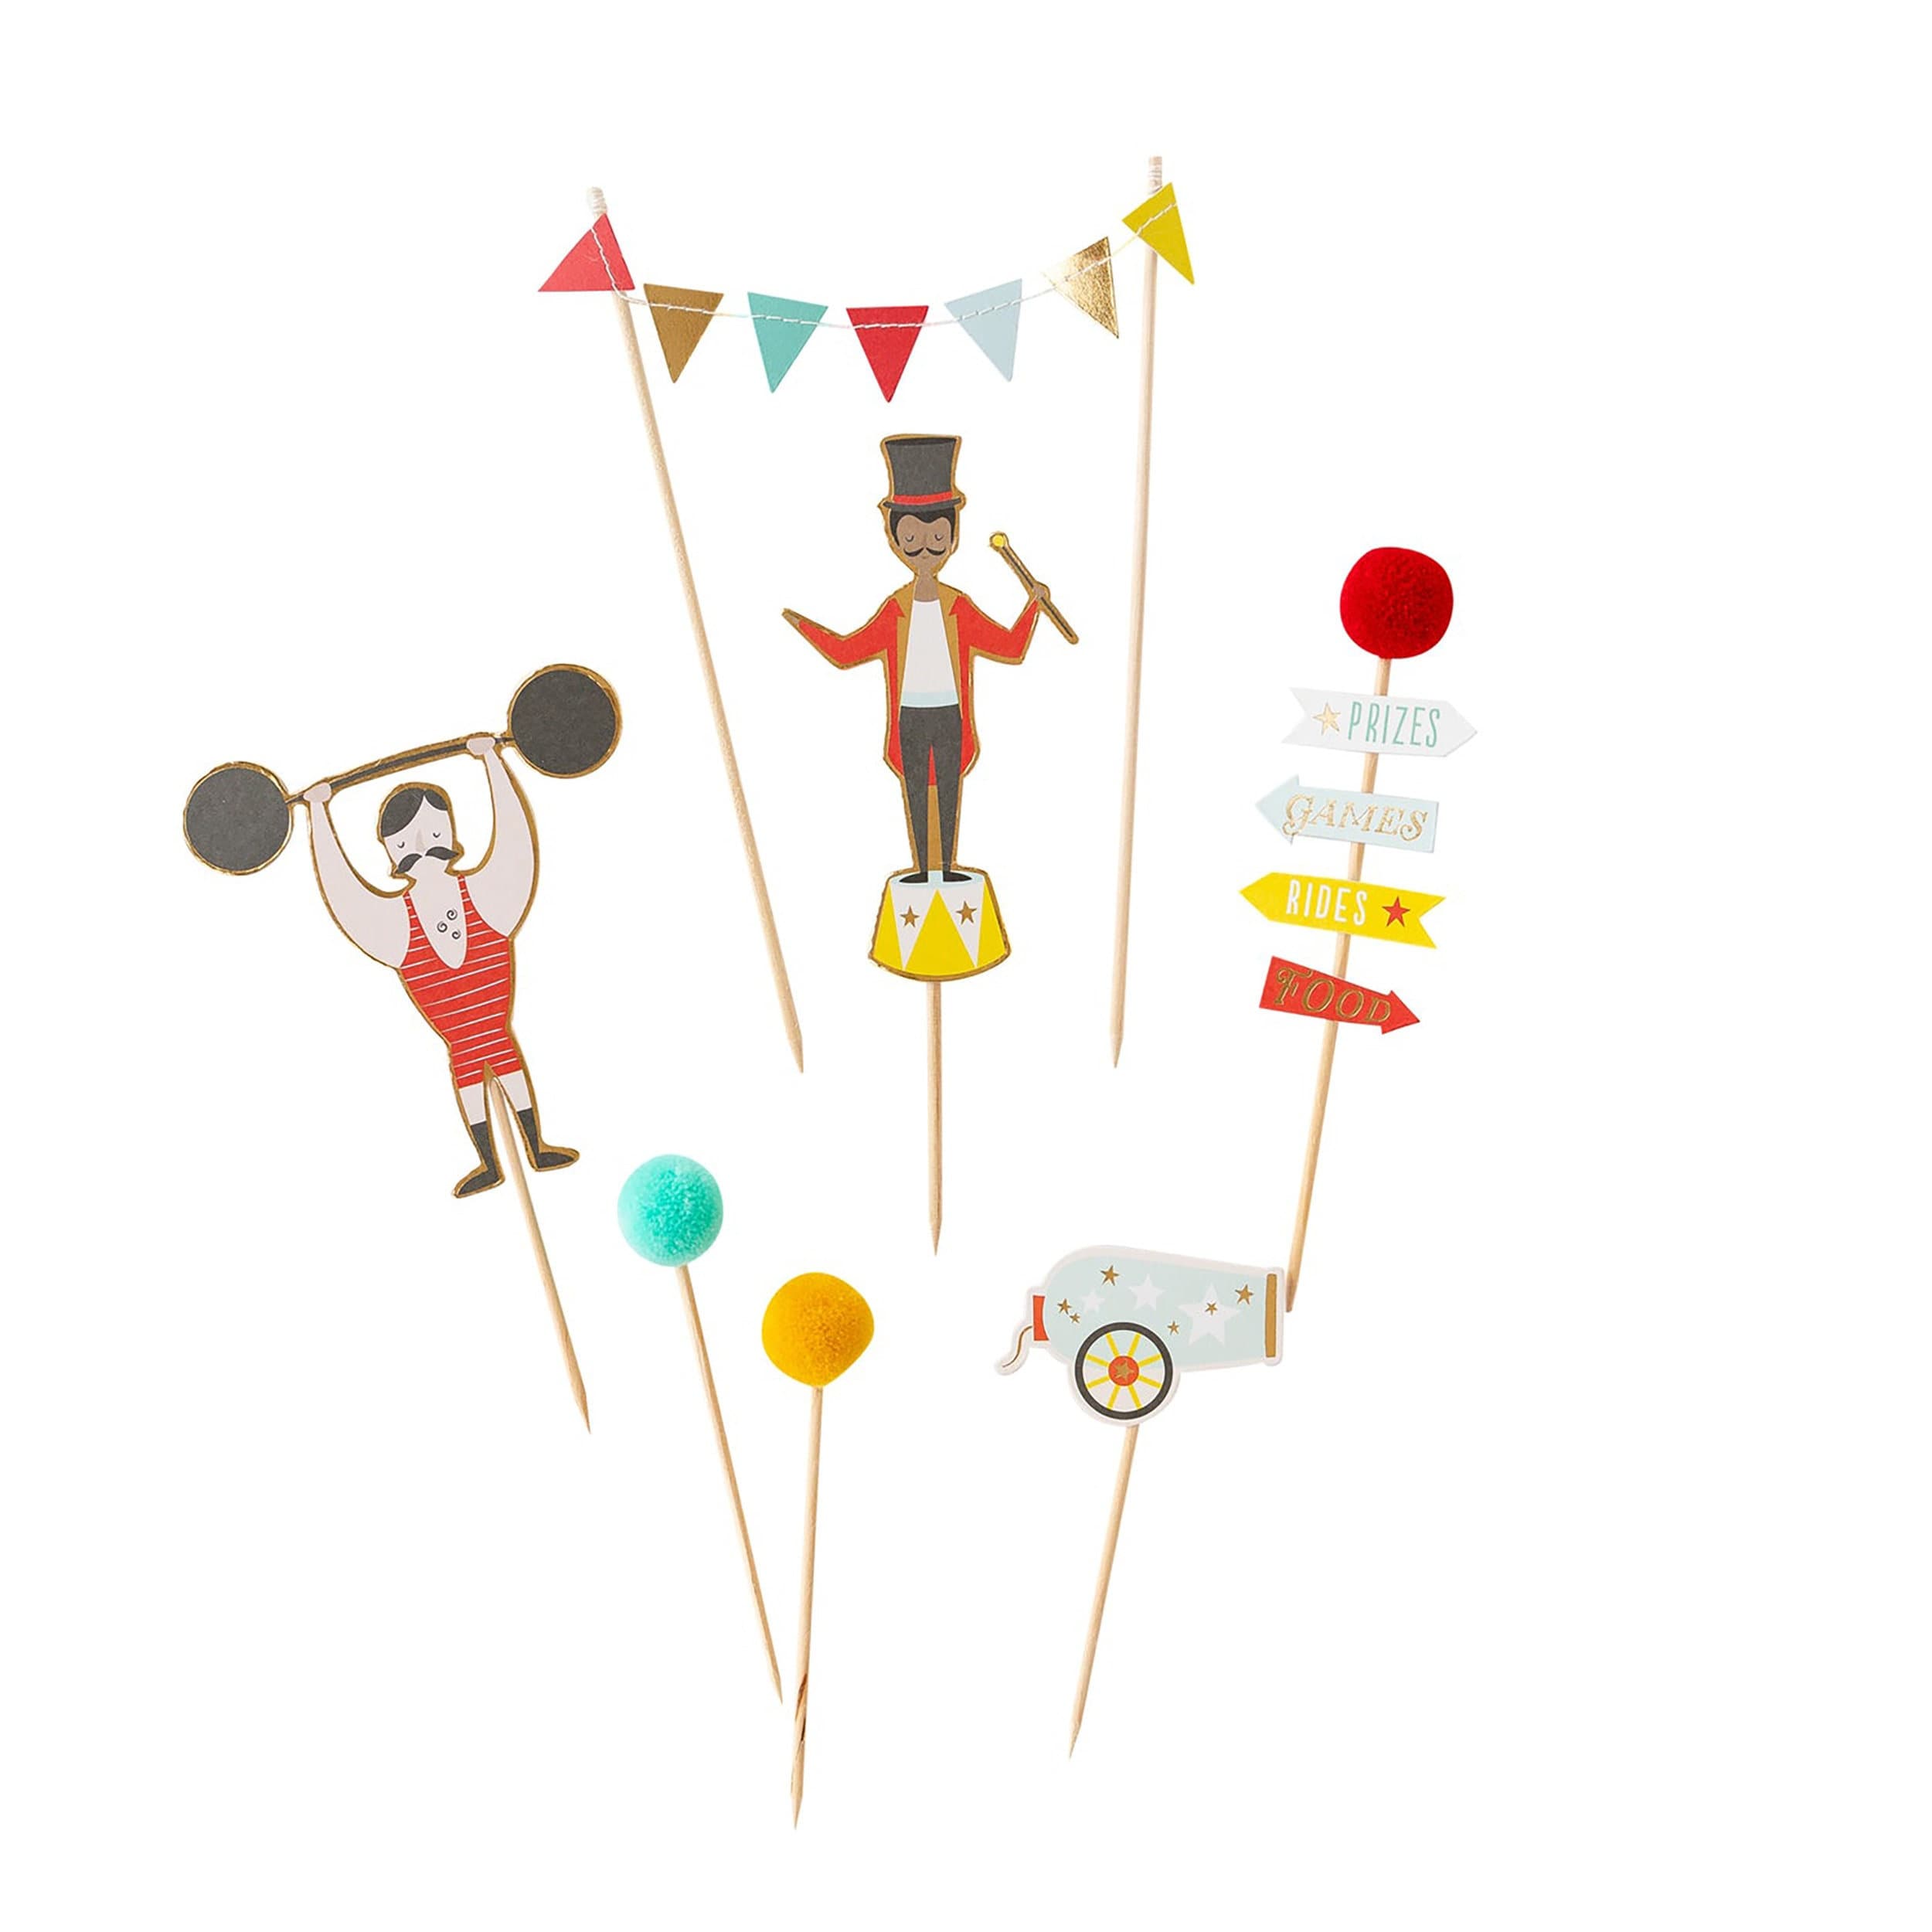 Circus Cake Toppers | Carnival Cake Toppers - Circus Baby Shower - Circus Birthday Party - Circus Party Decorations - Carnival Theme Party